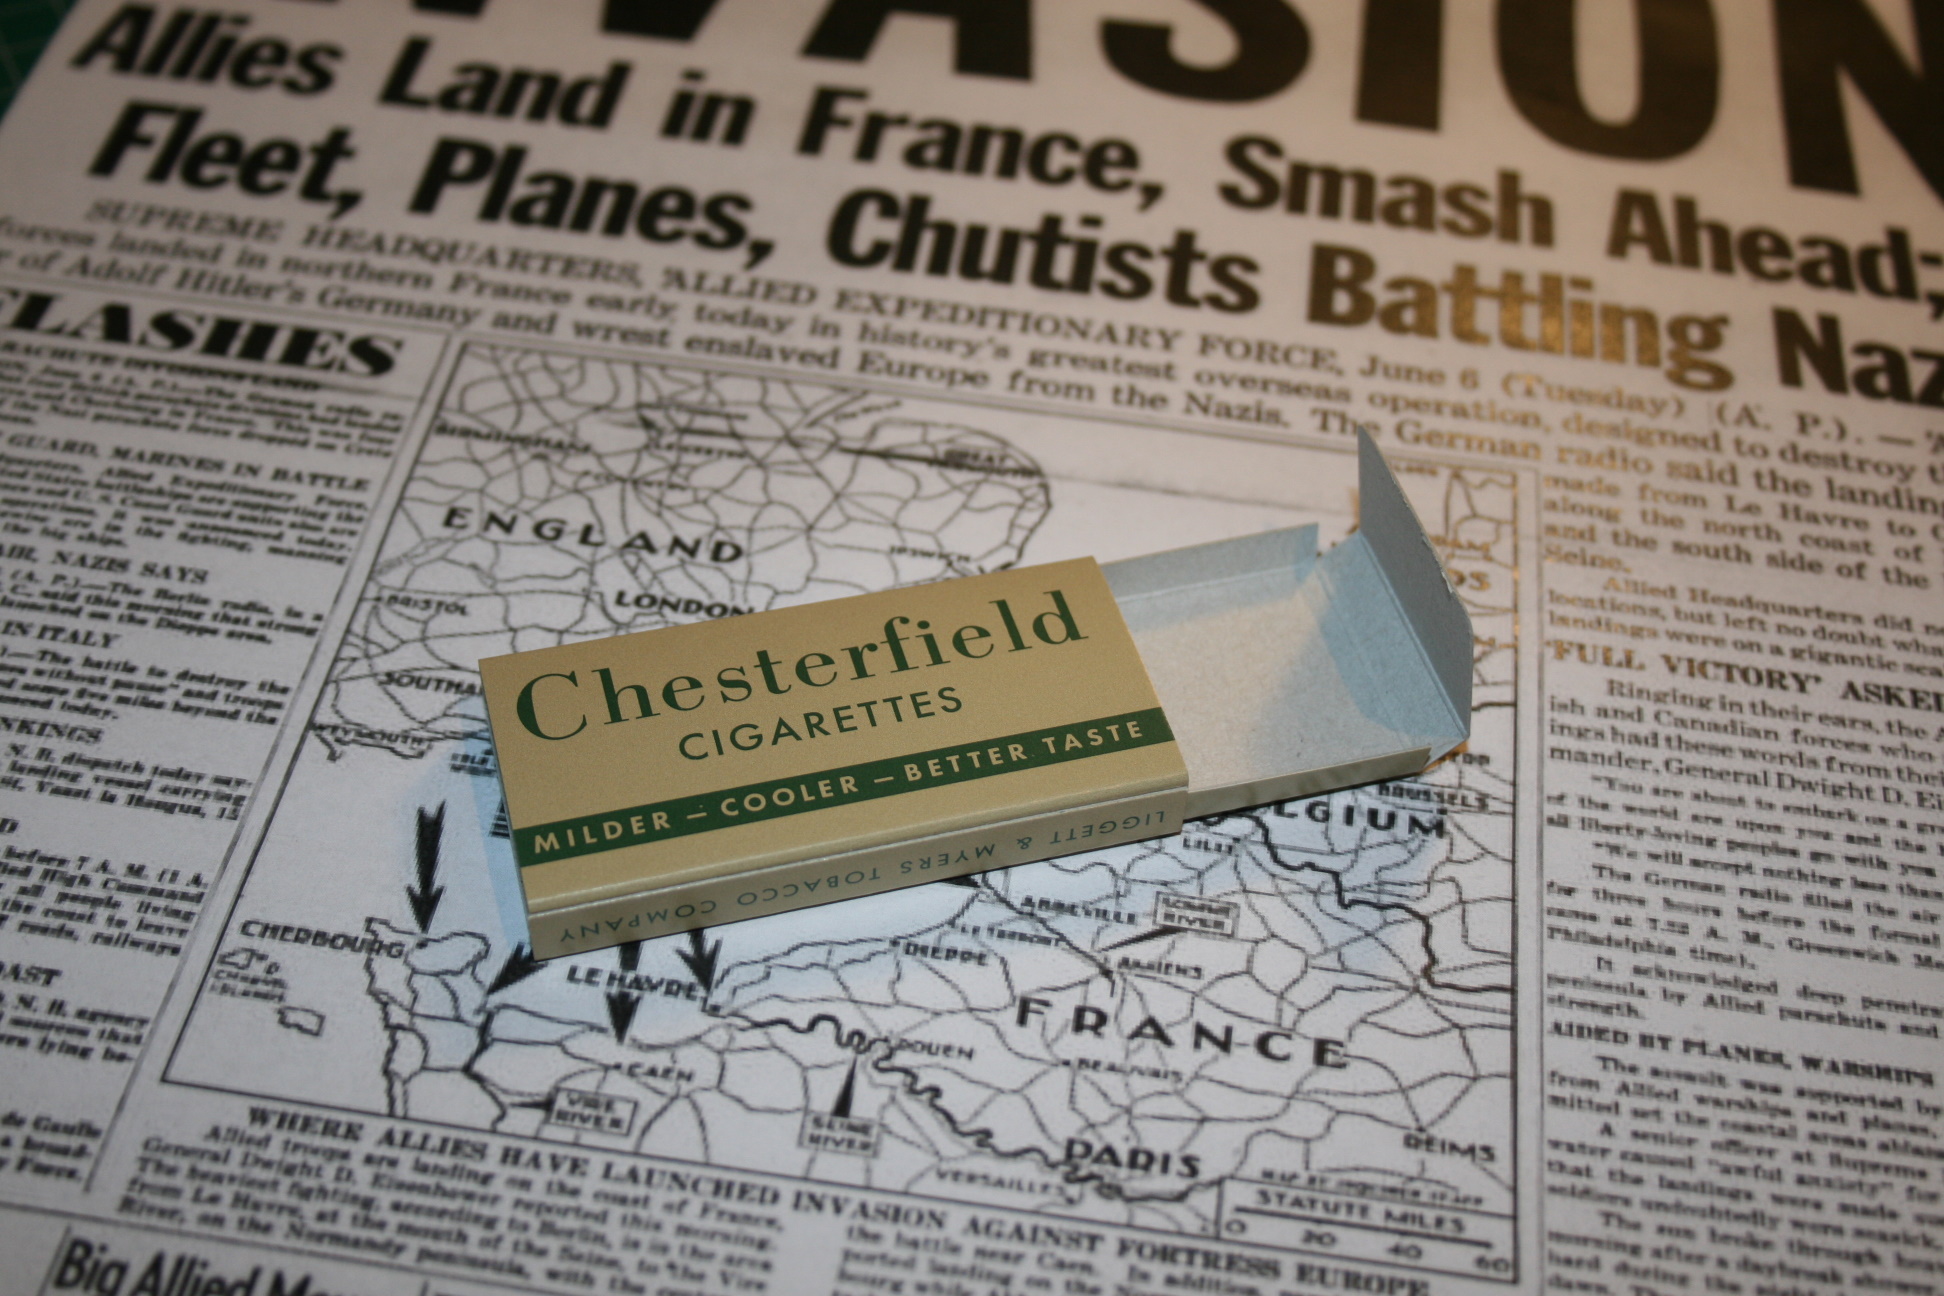 Chesterfield cigarette packet - K ration issue